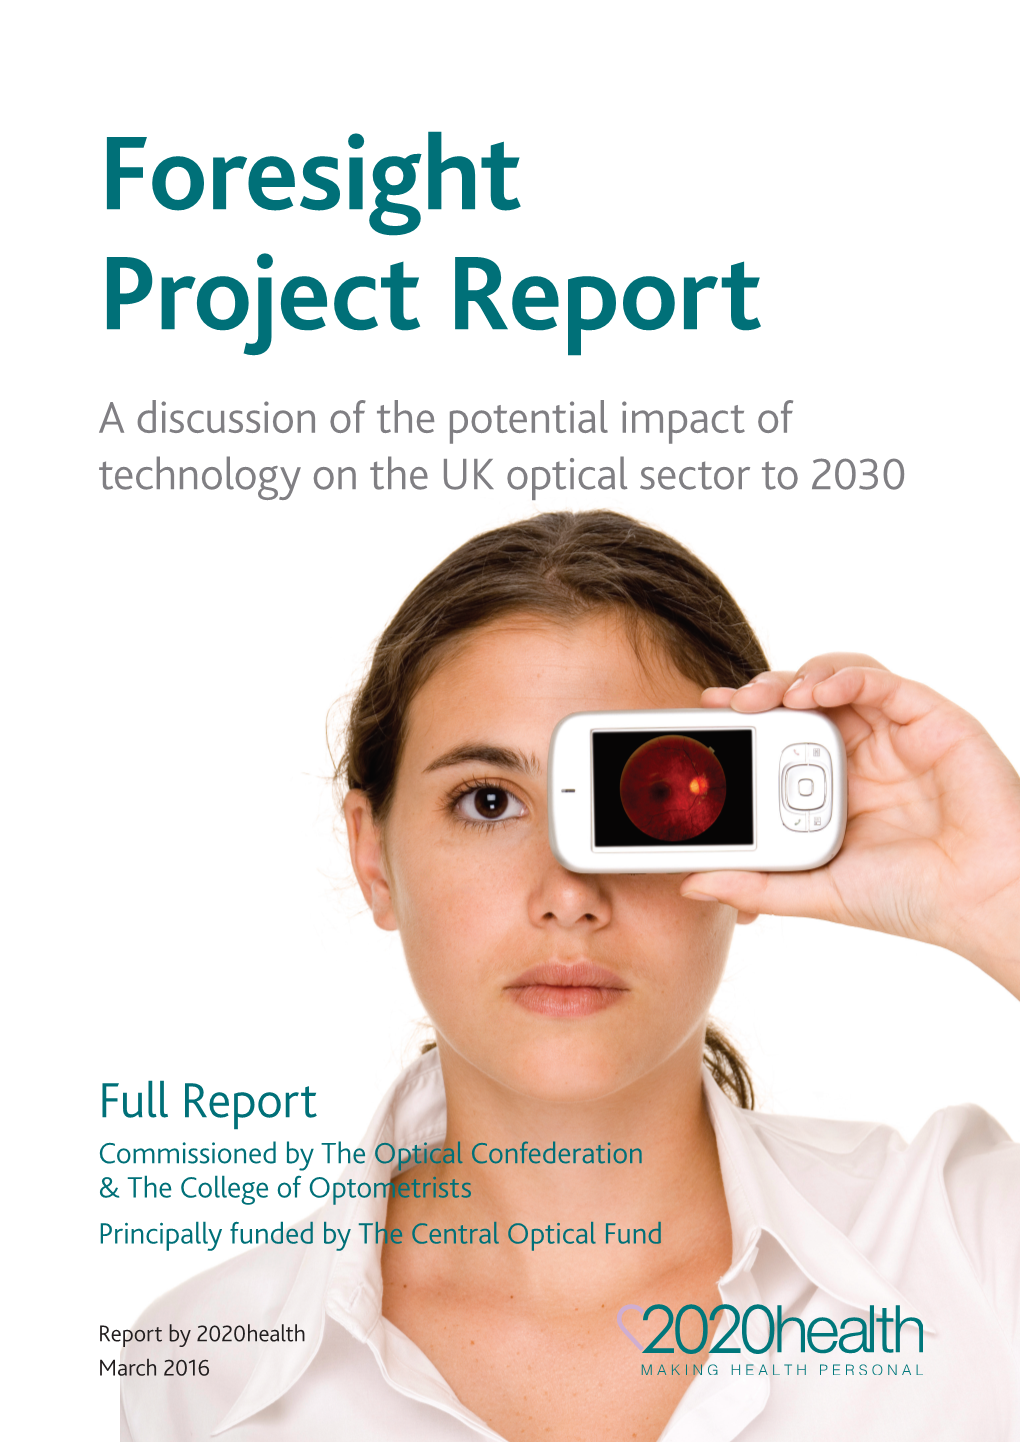 Foresight Project Report a Discussion of the Potential Impact of Technology on the UK Optical Sector to 2030